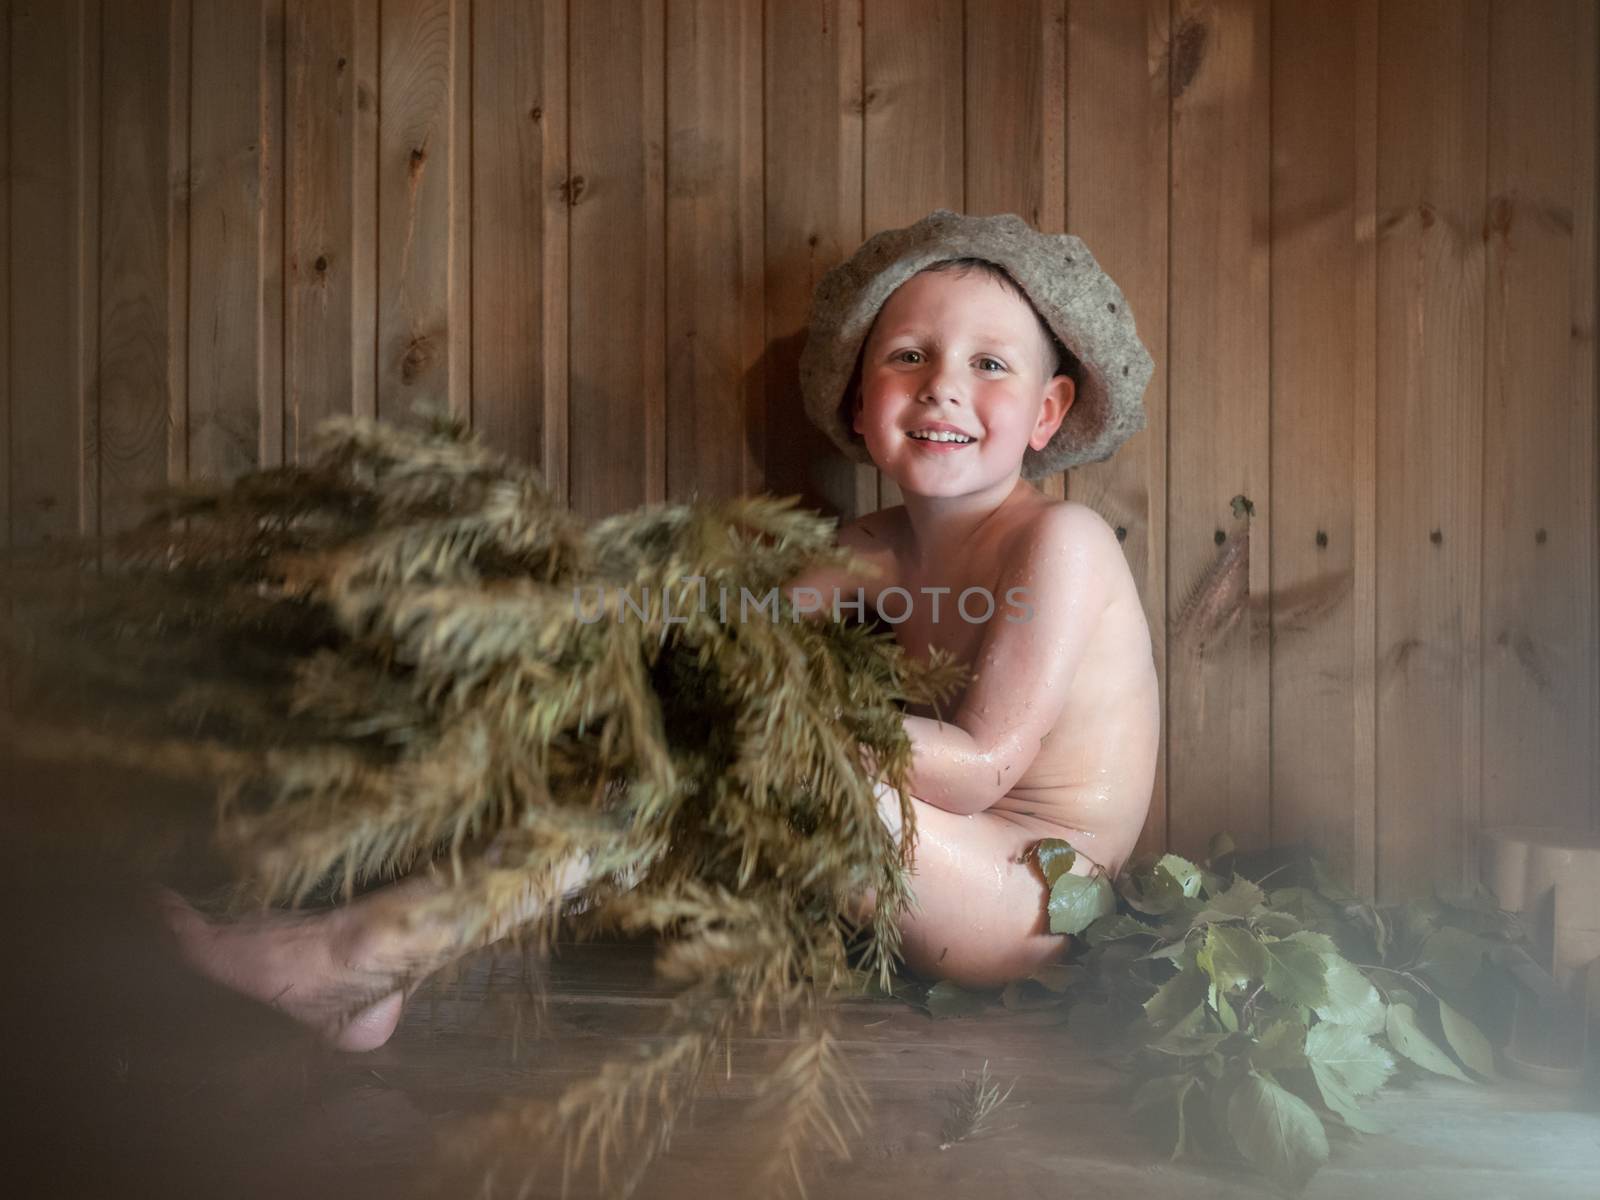 Four-year-old naked boy in hat with silver-fir broom in hands in Russian bath-house. Smiling little child is taking steam-bath at sauna. Authentic shot